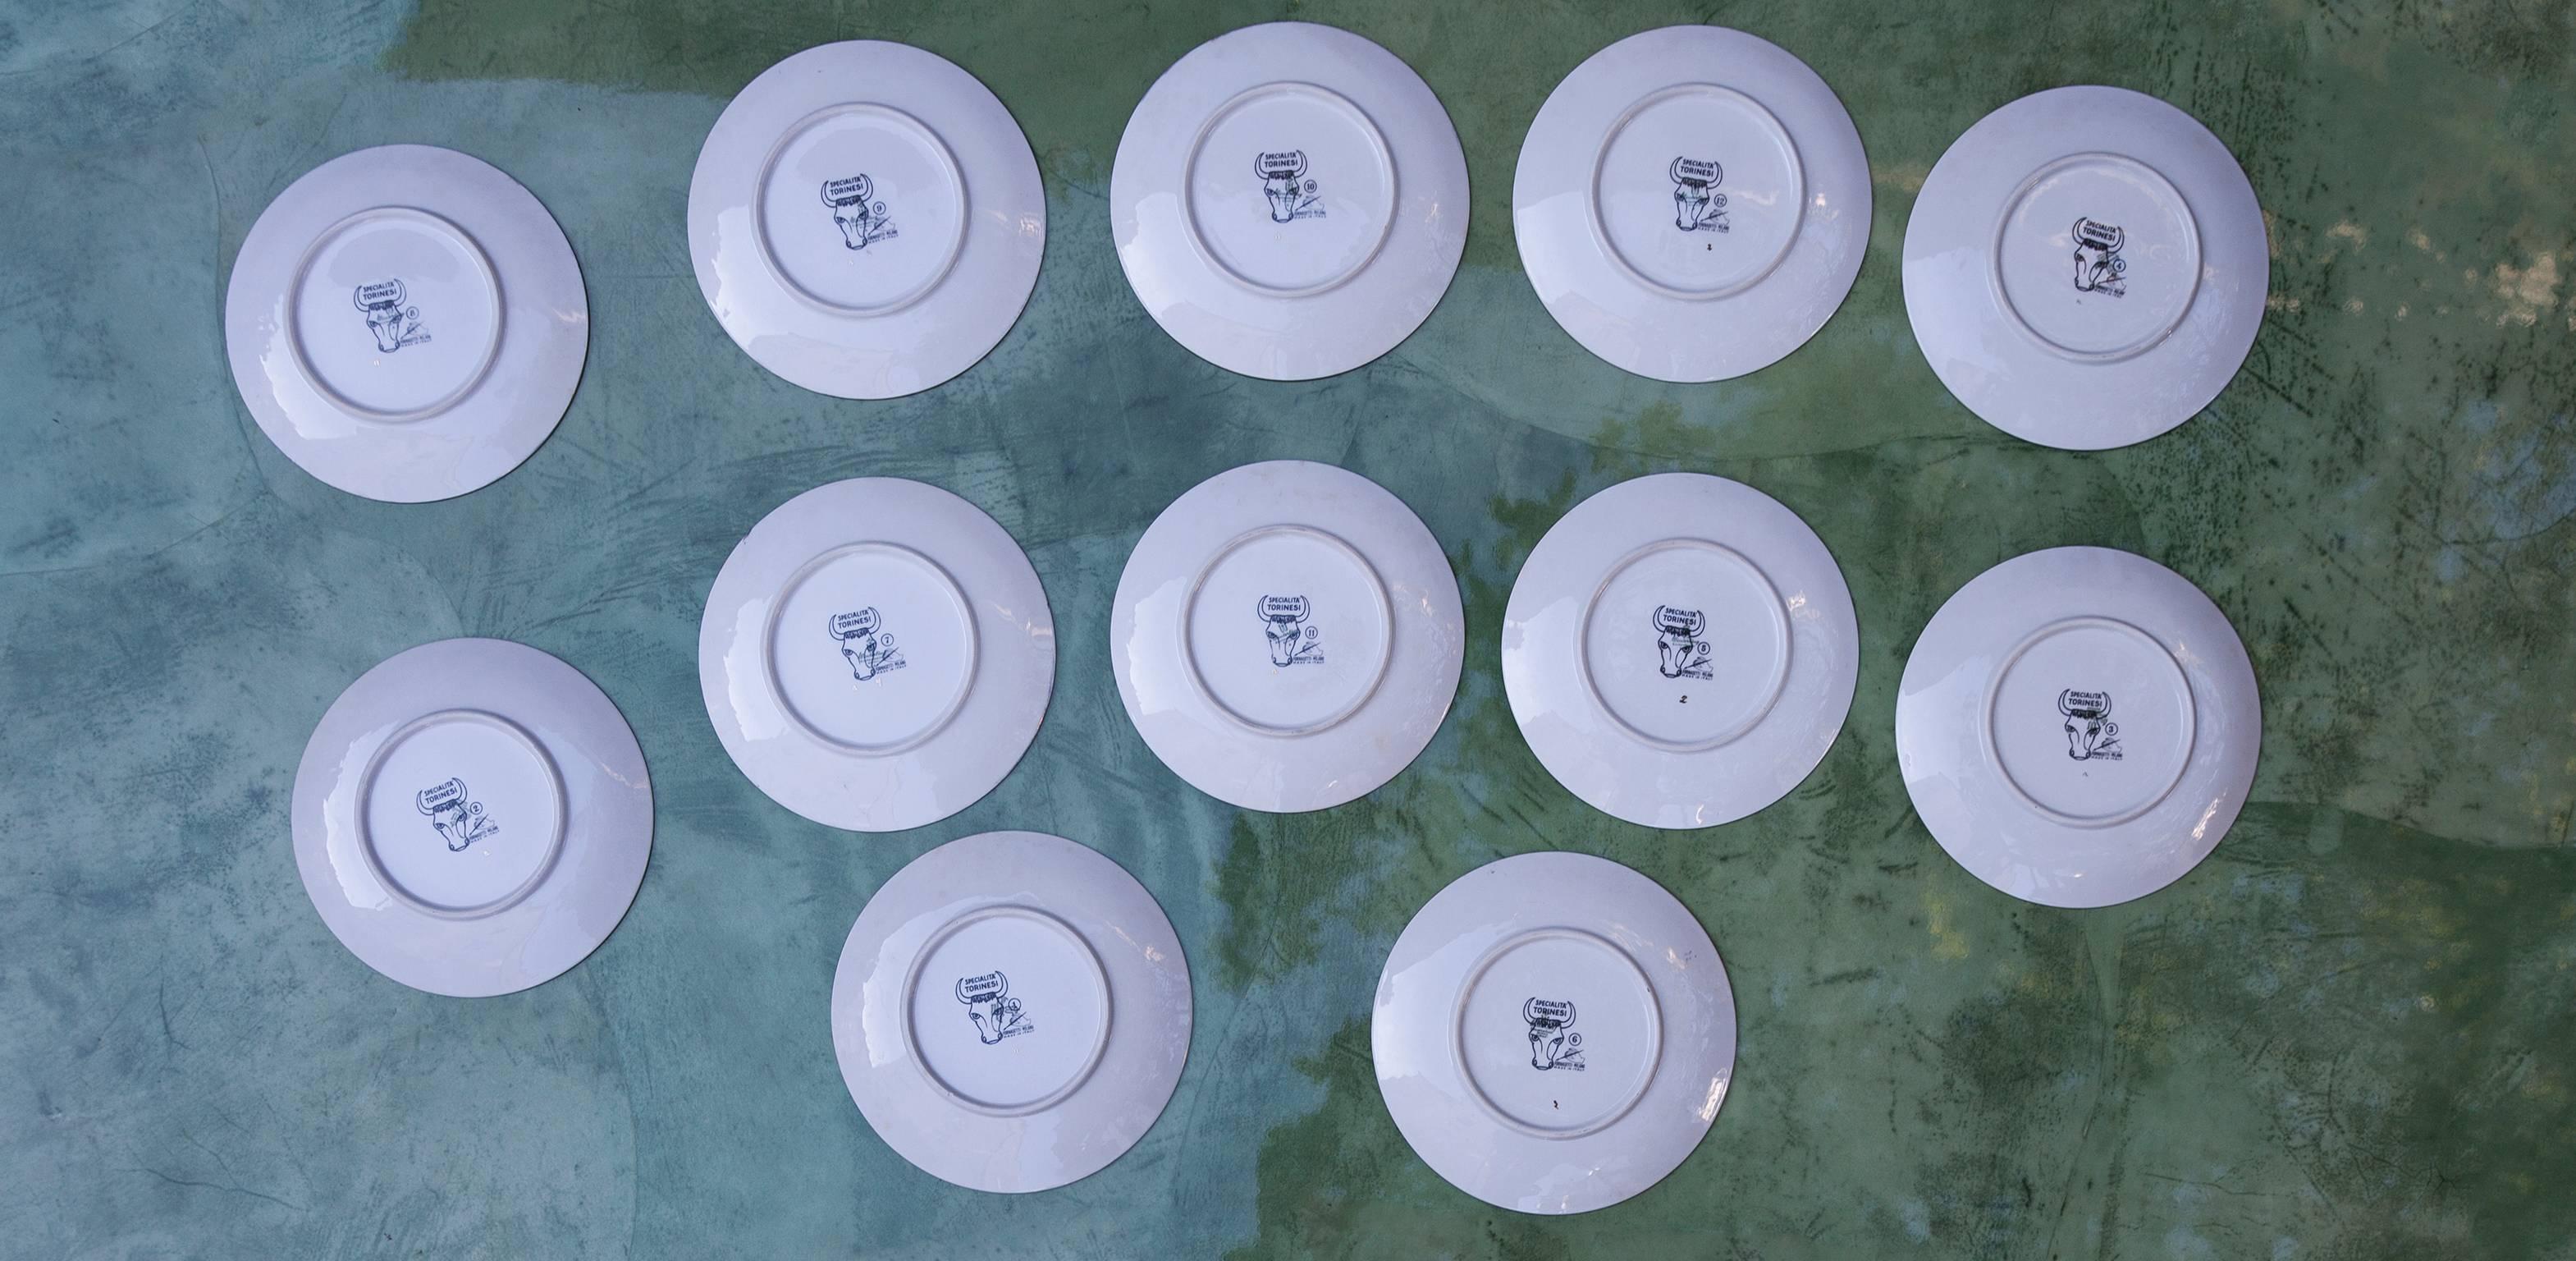 Complete set of 12 plates of the 